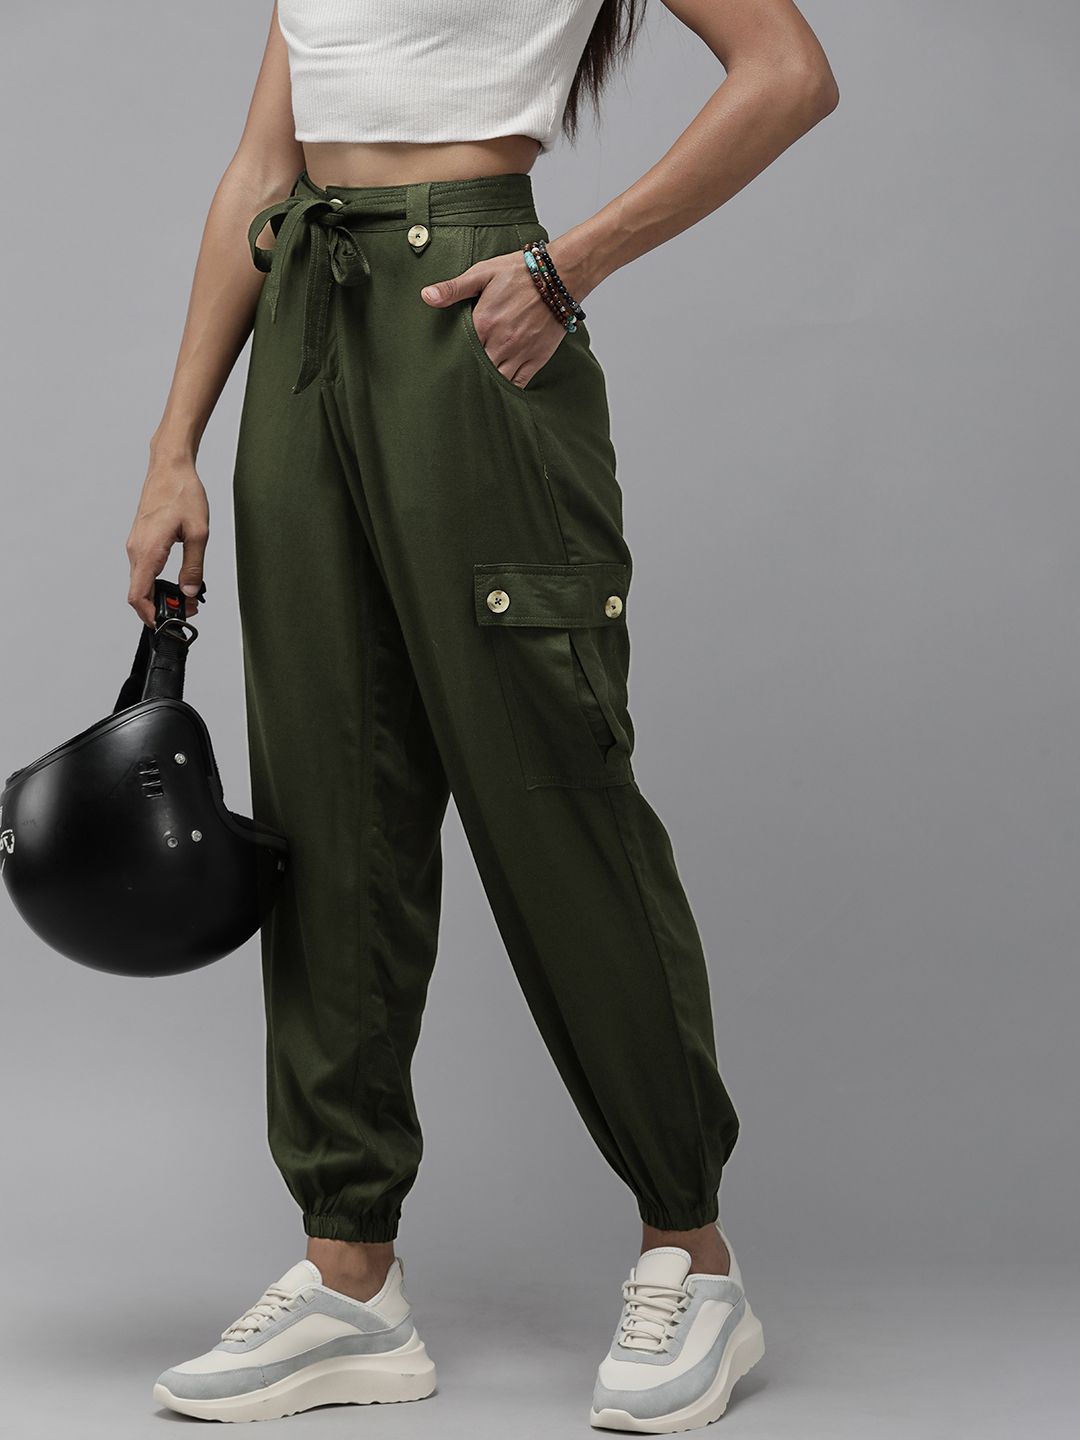 The Roadster Lifestyle Co. Women Olive Green Solid Joggers Price in India